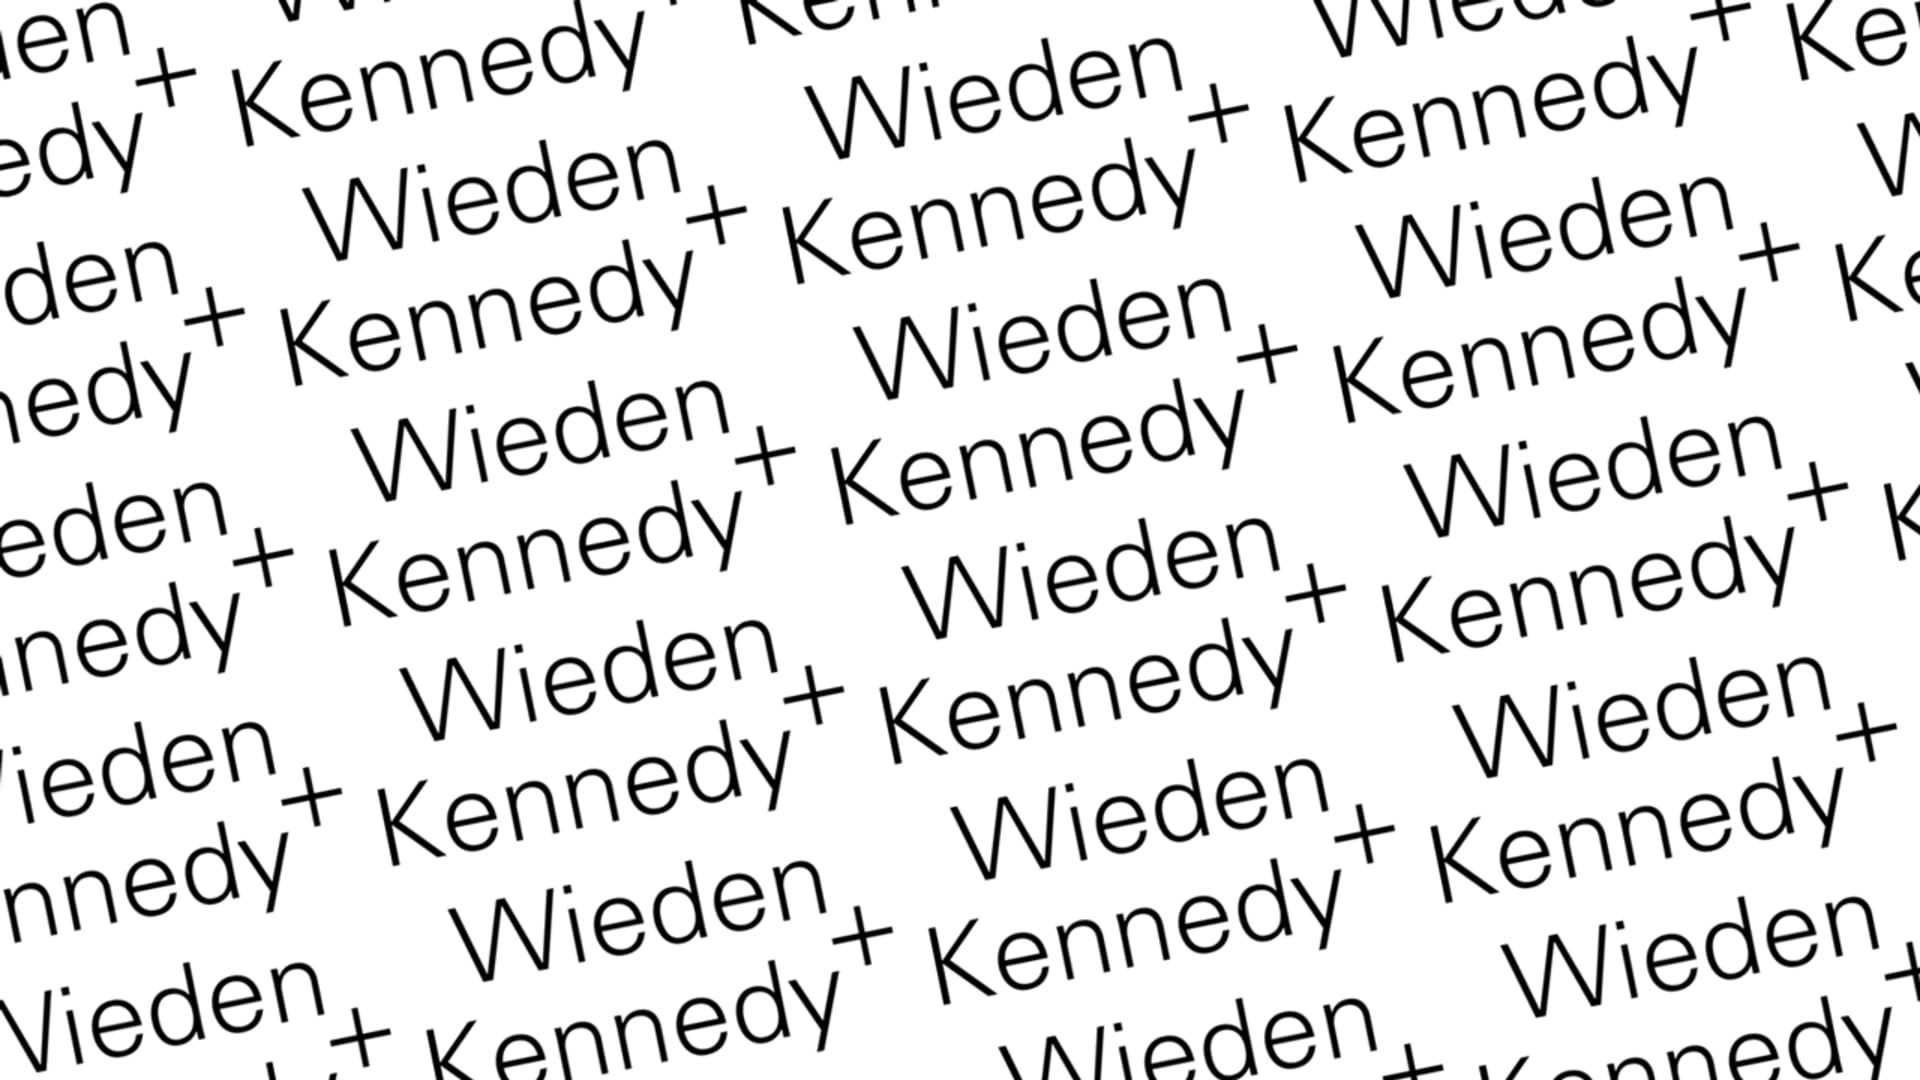 The heads of Wieden+Kennedy’s groundbreaking tech division are leaving